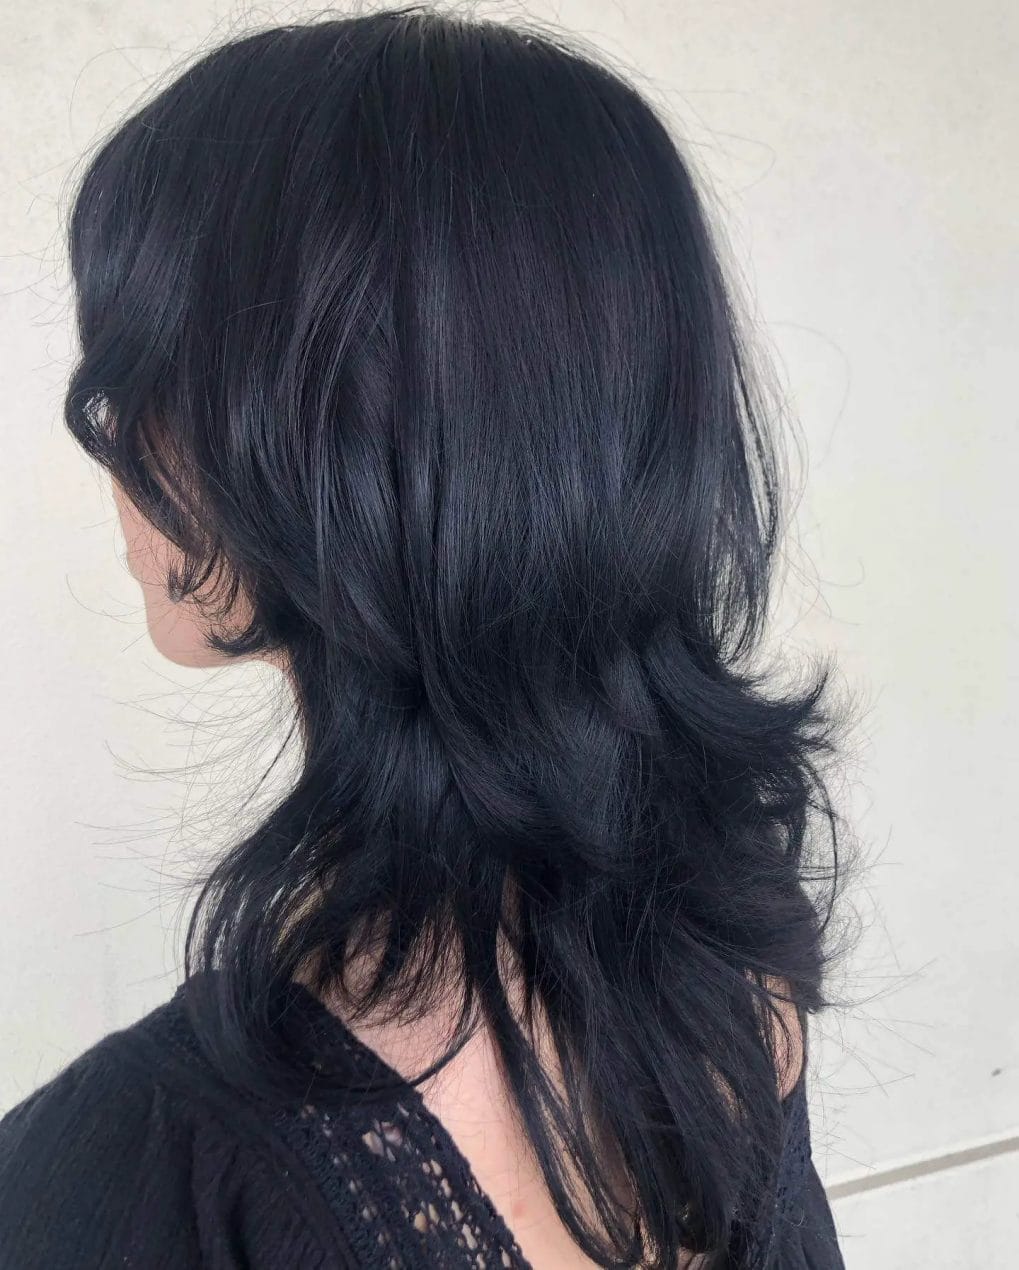 Sleek inky black octopus haircut with graduated layers for mysterious allure.